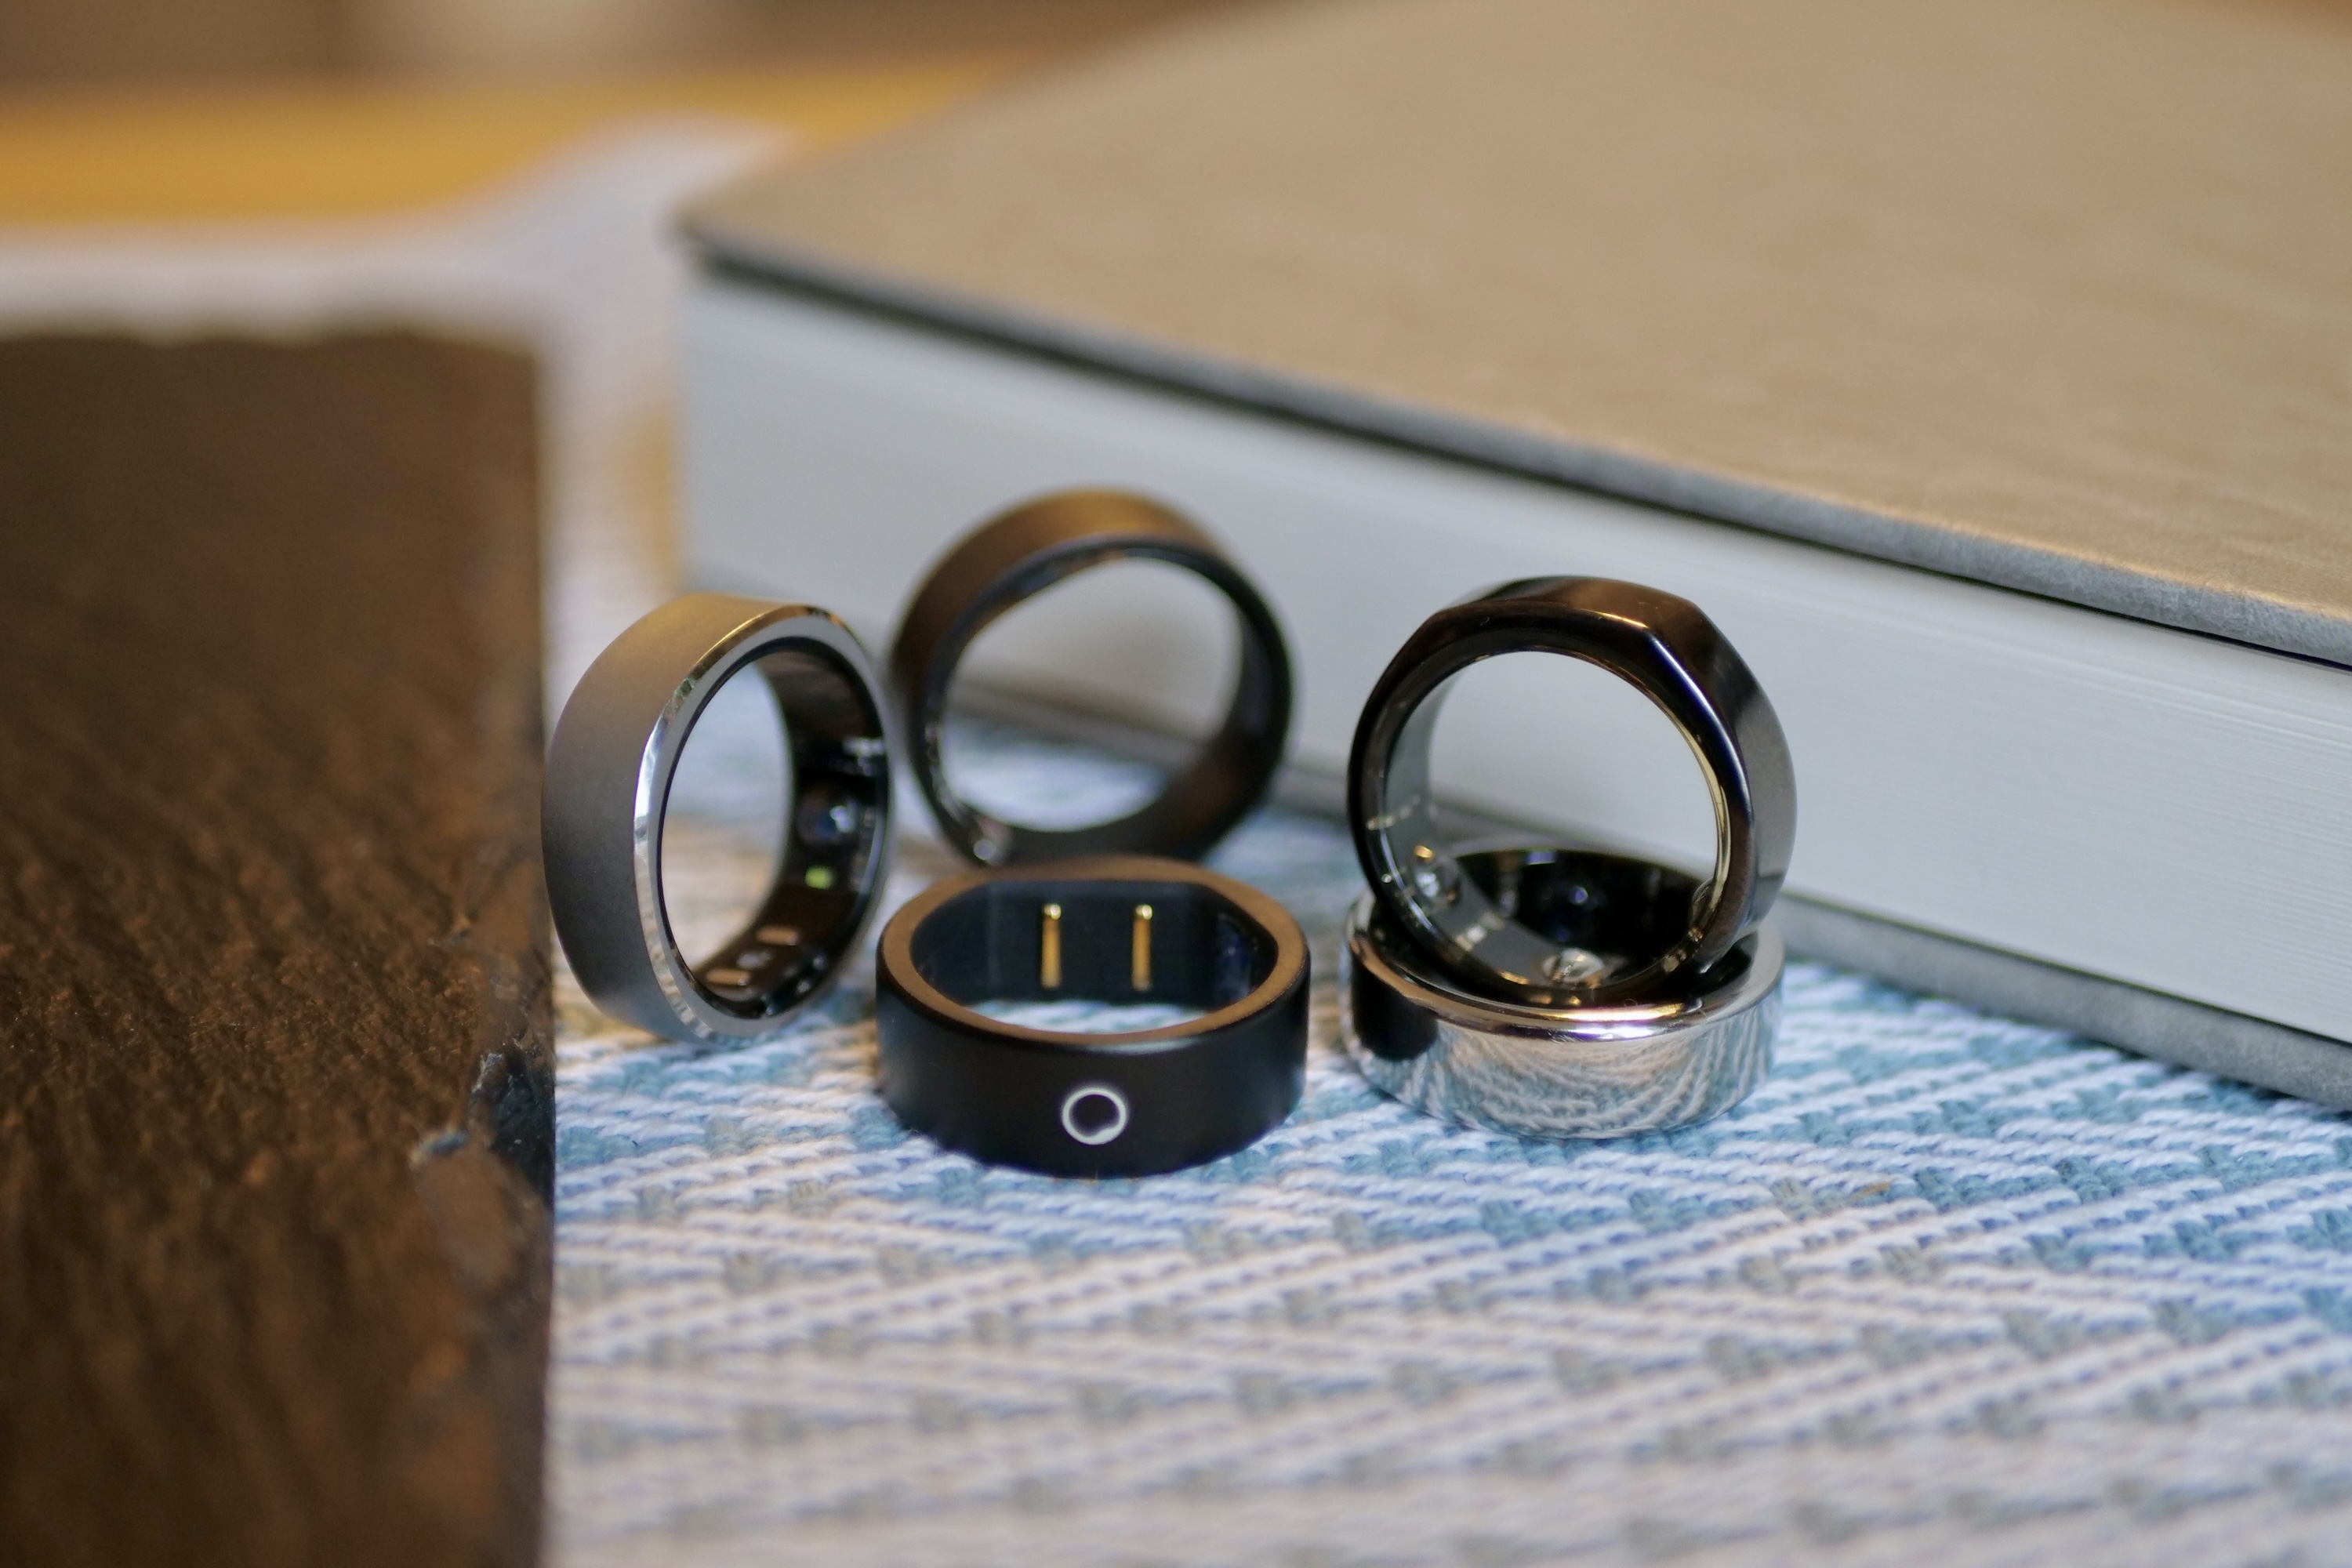 There's a big problem with smart rings